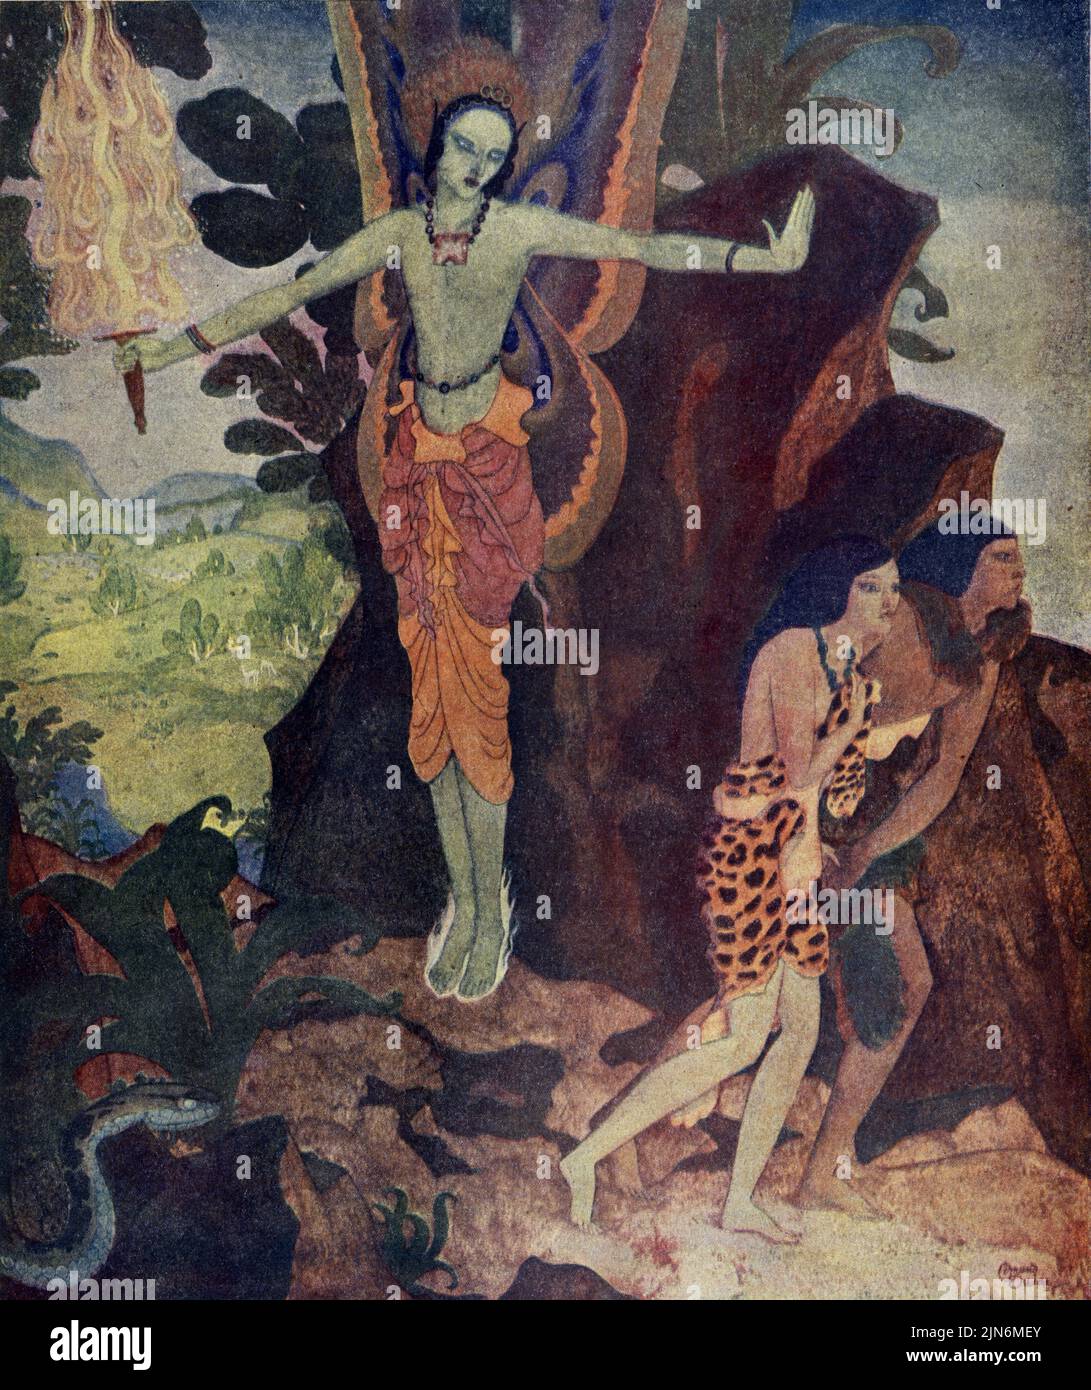 'The Angel with the Flaming Sword drives Adam and Eve out of  Eden' published Oct. 5,1924 in the American Weekly magazine painted by Edmund Dulac. Stock Photo